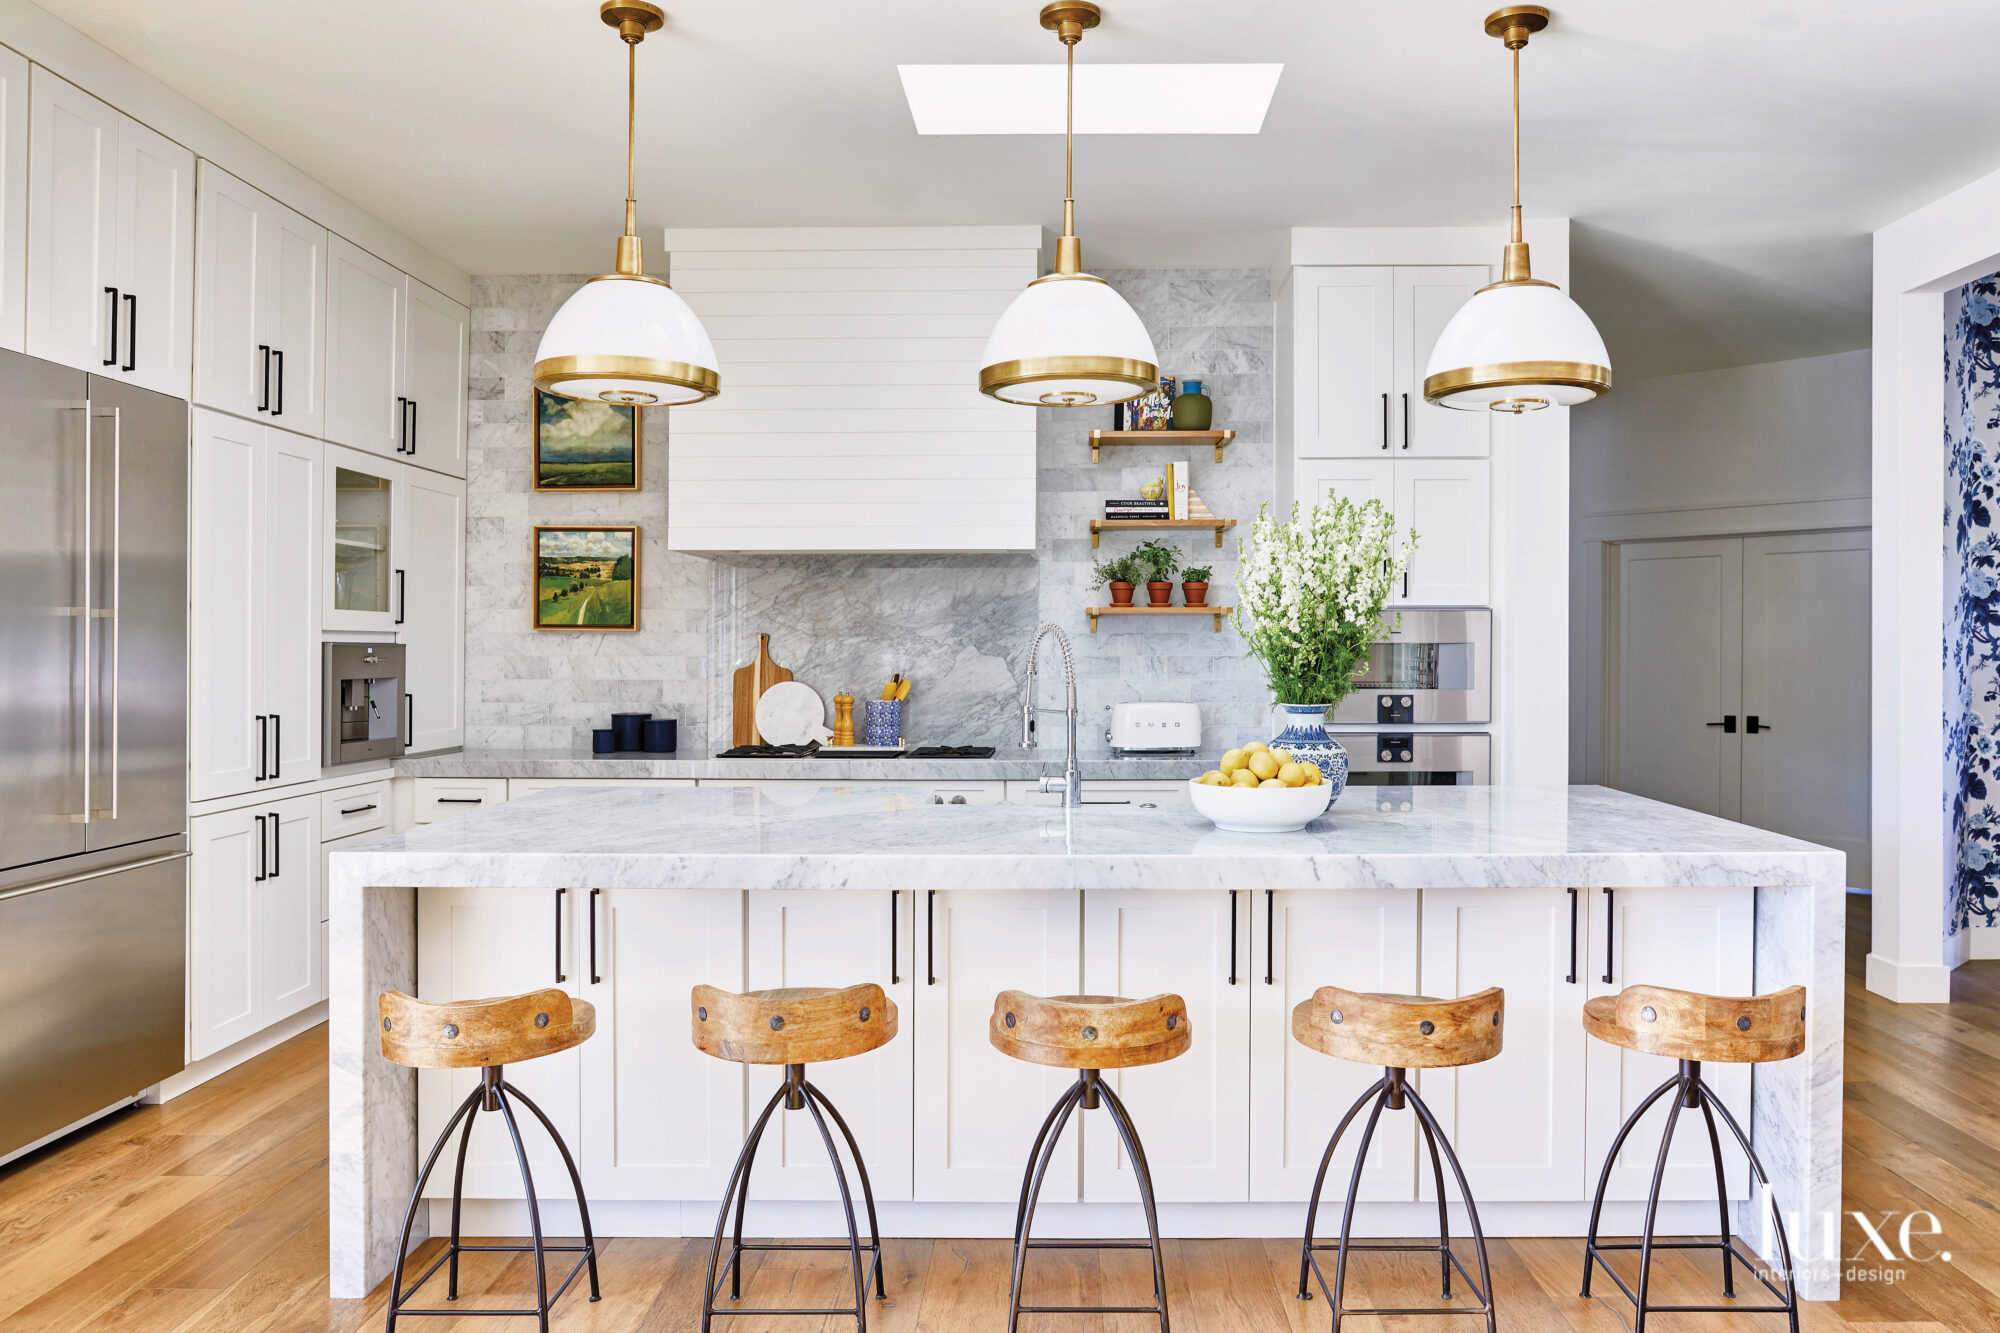 The white kitchen has white and gold pendant lighting, marble countertops and wooden stools.